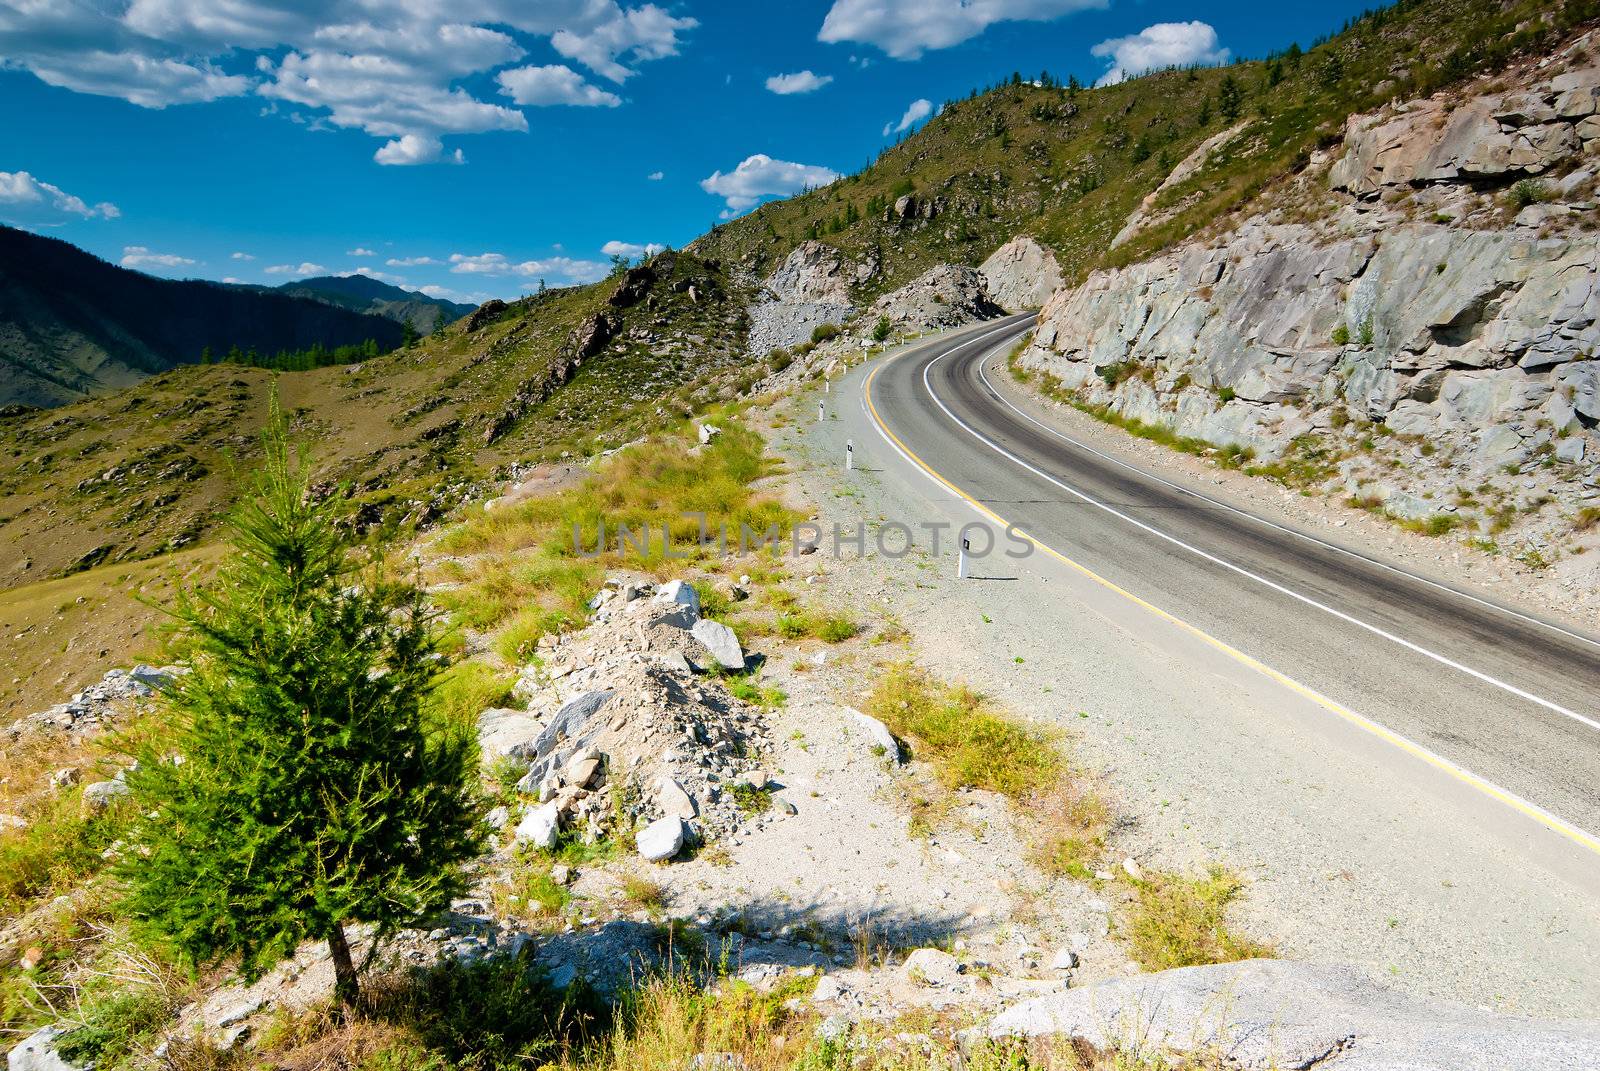 The road in the mountains. Altai Mountains. Russia.